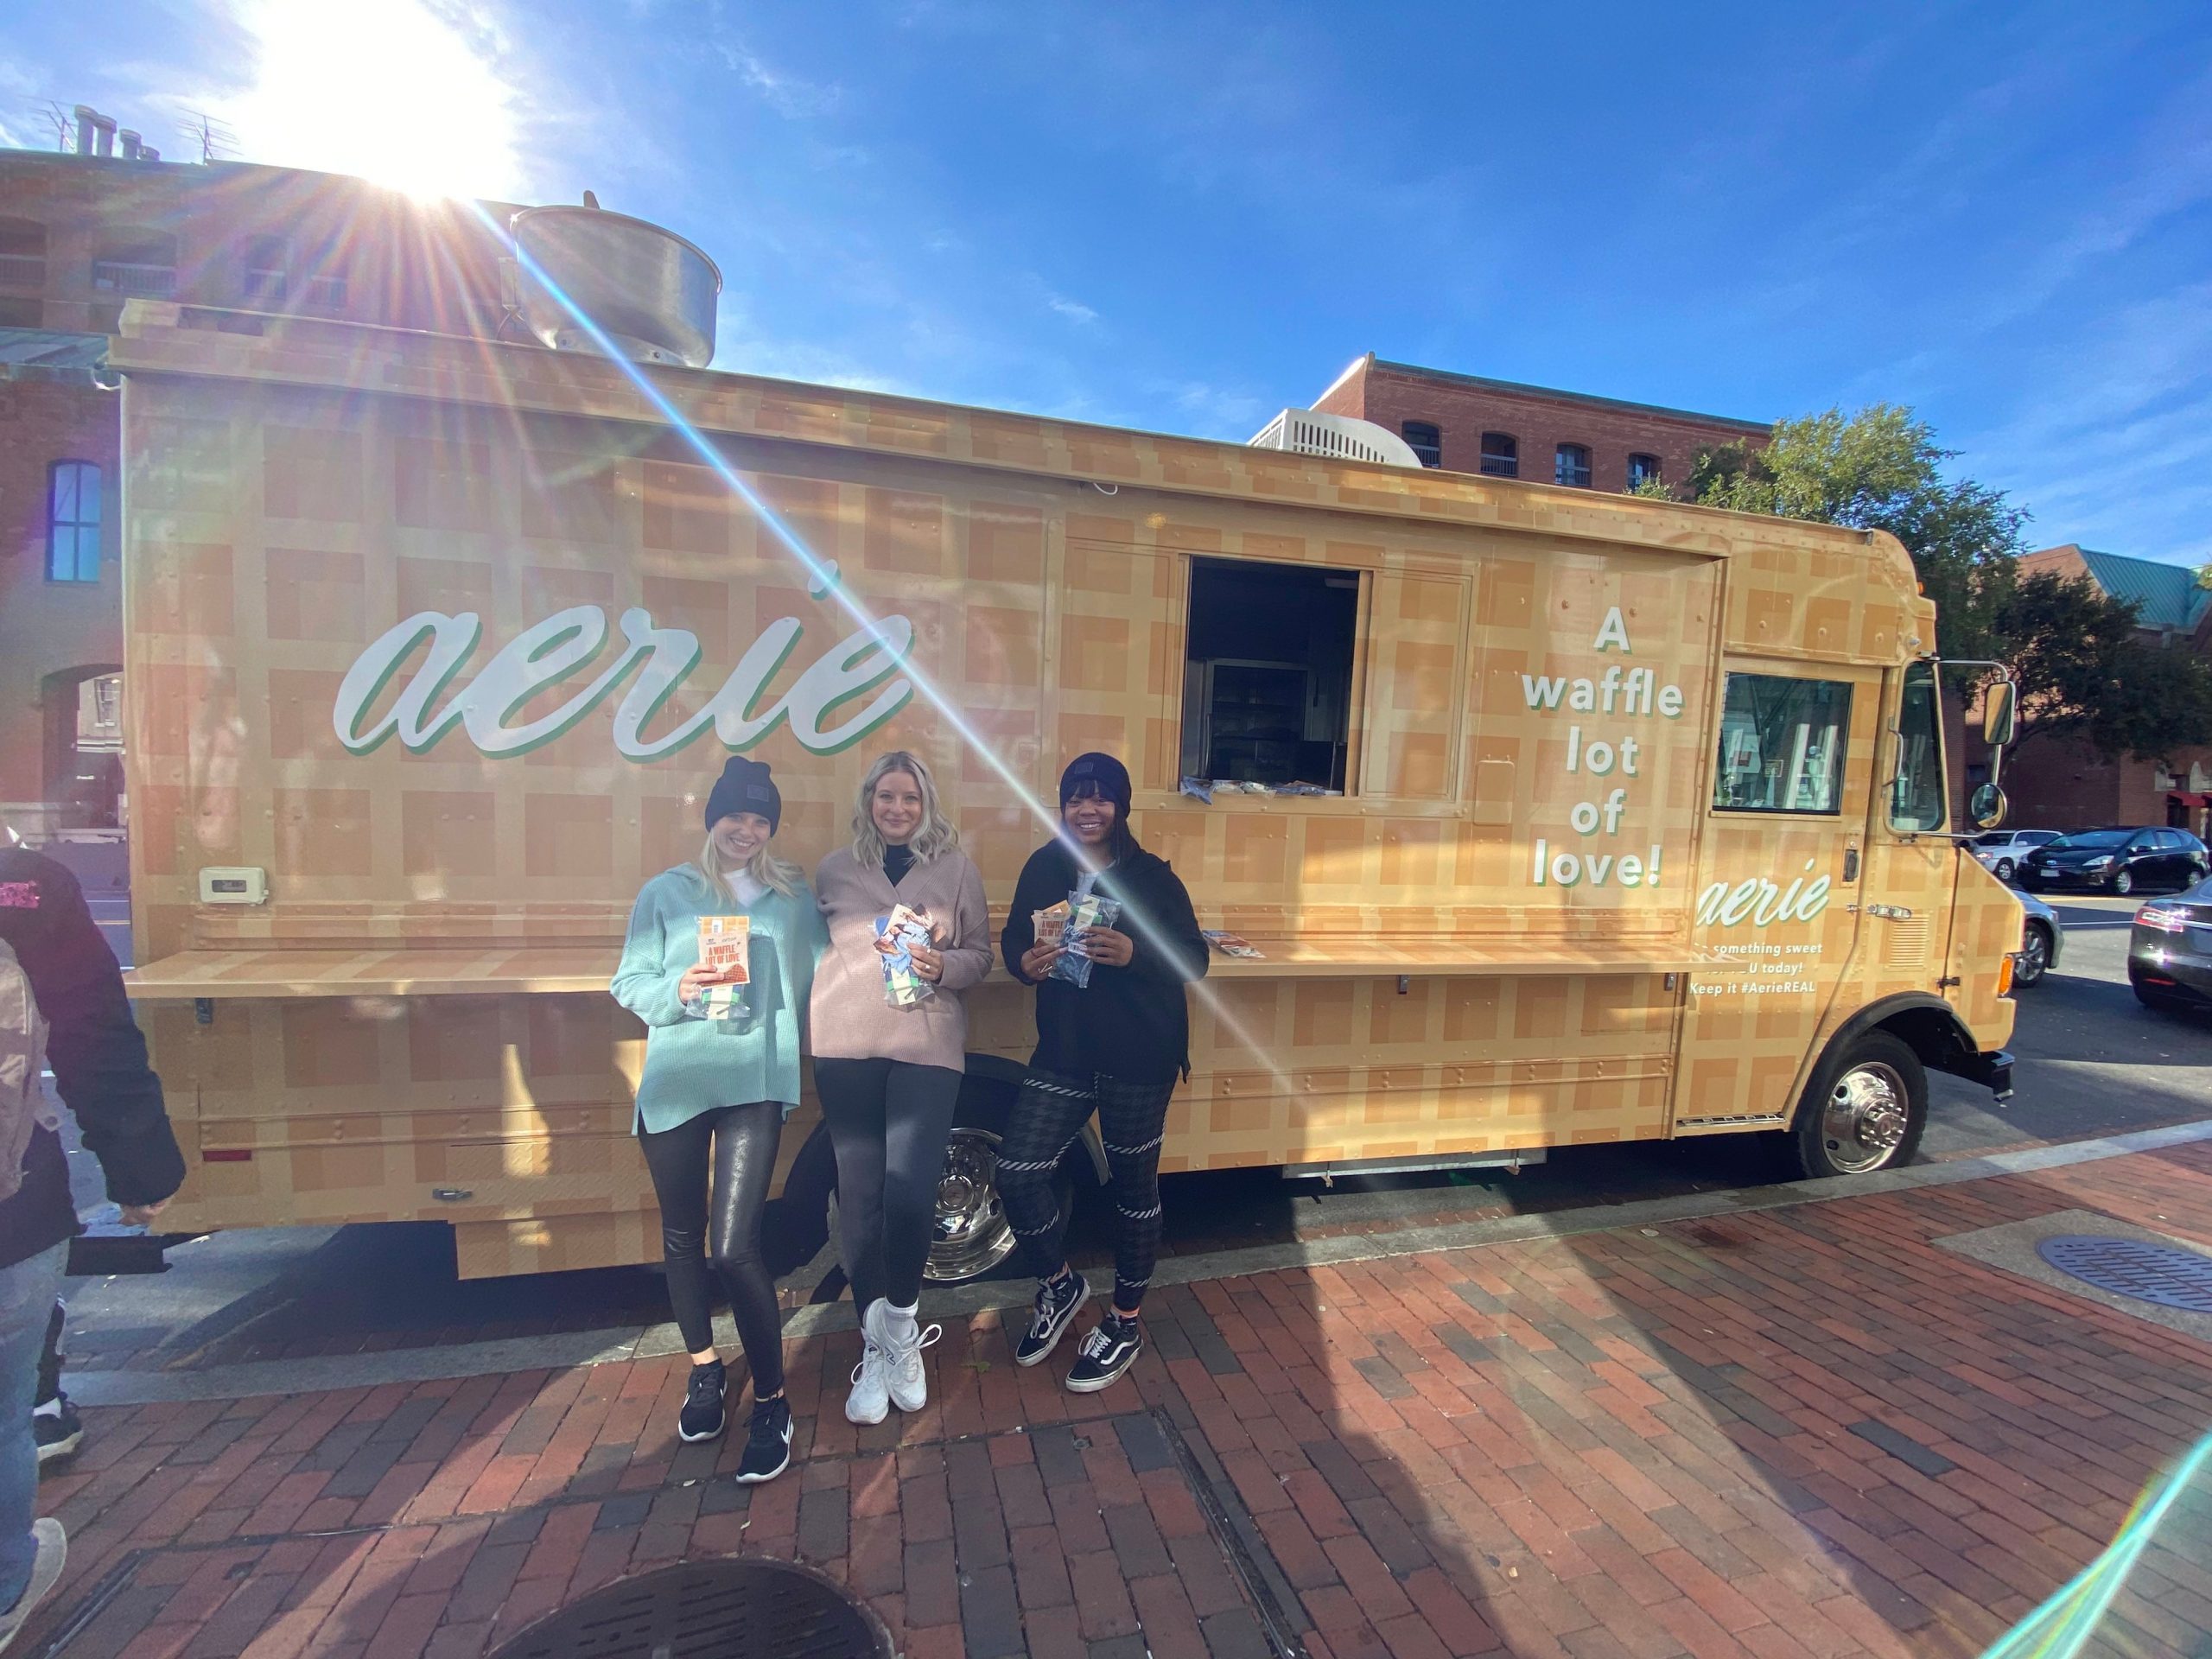 Aerie waffle truck.